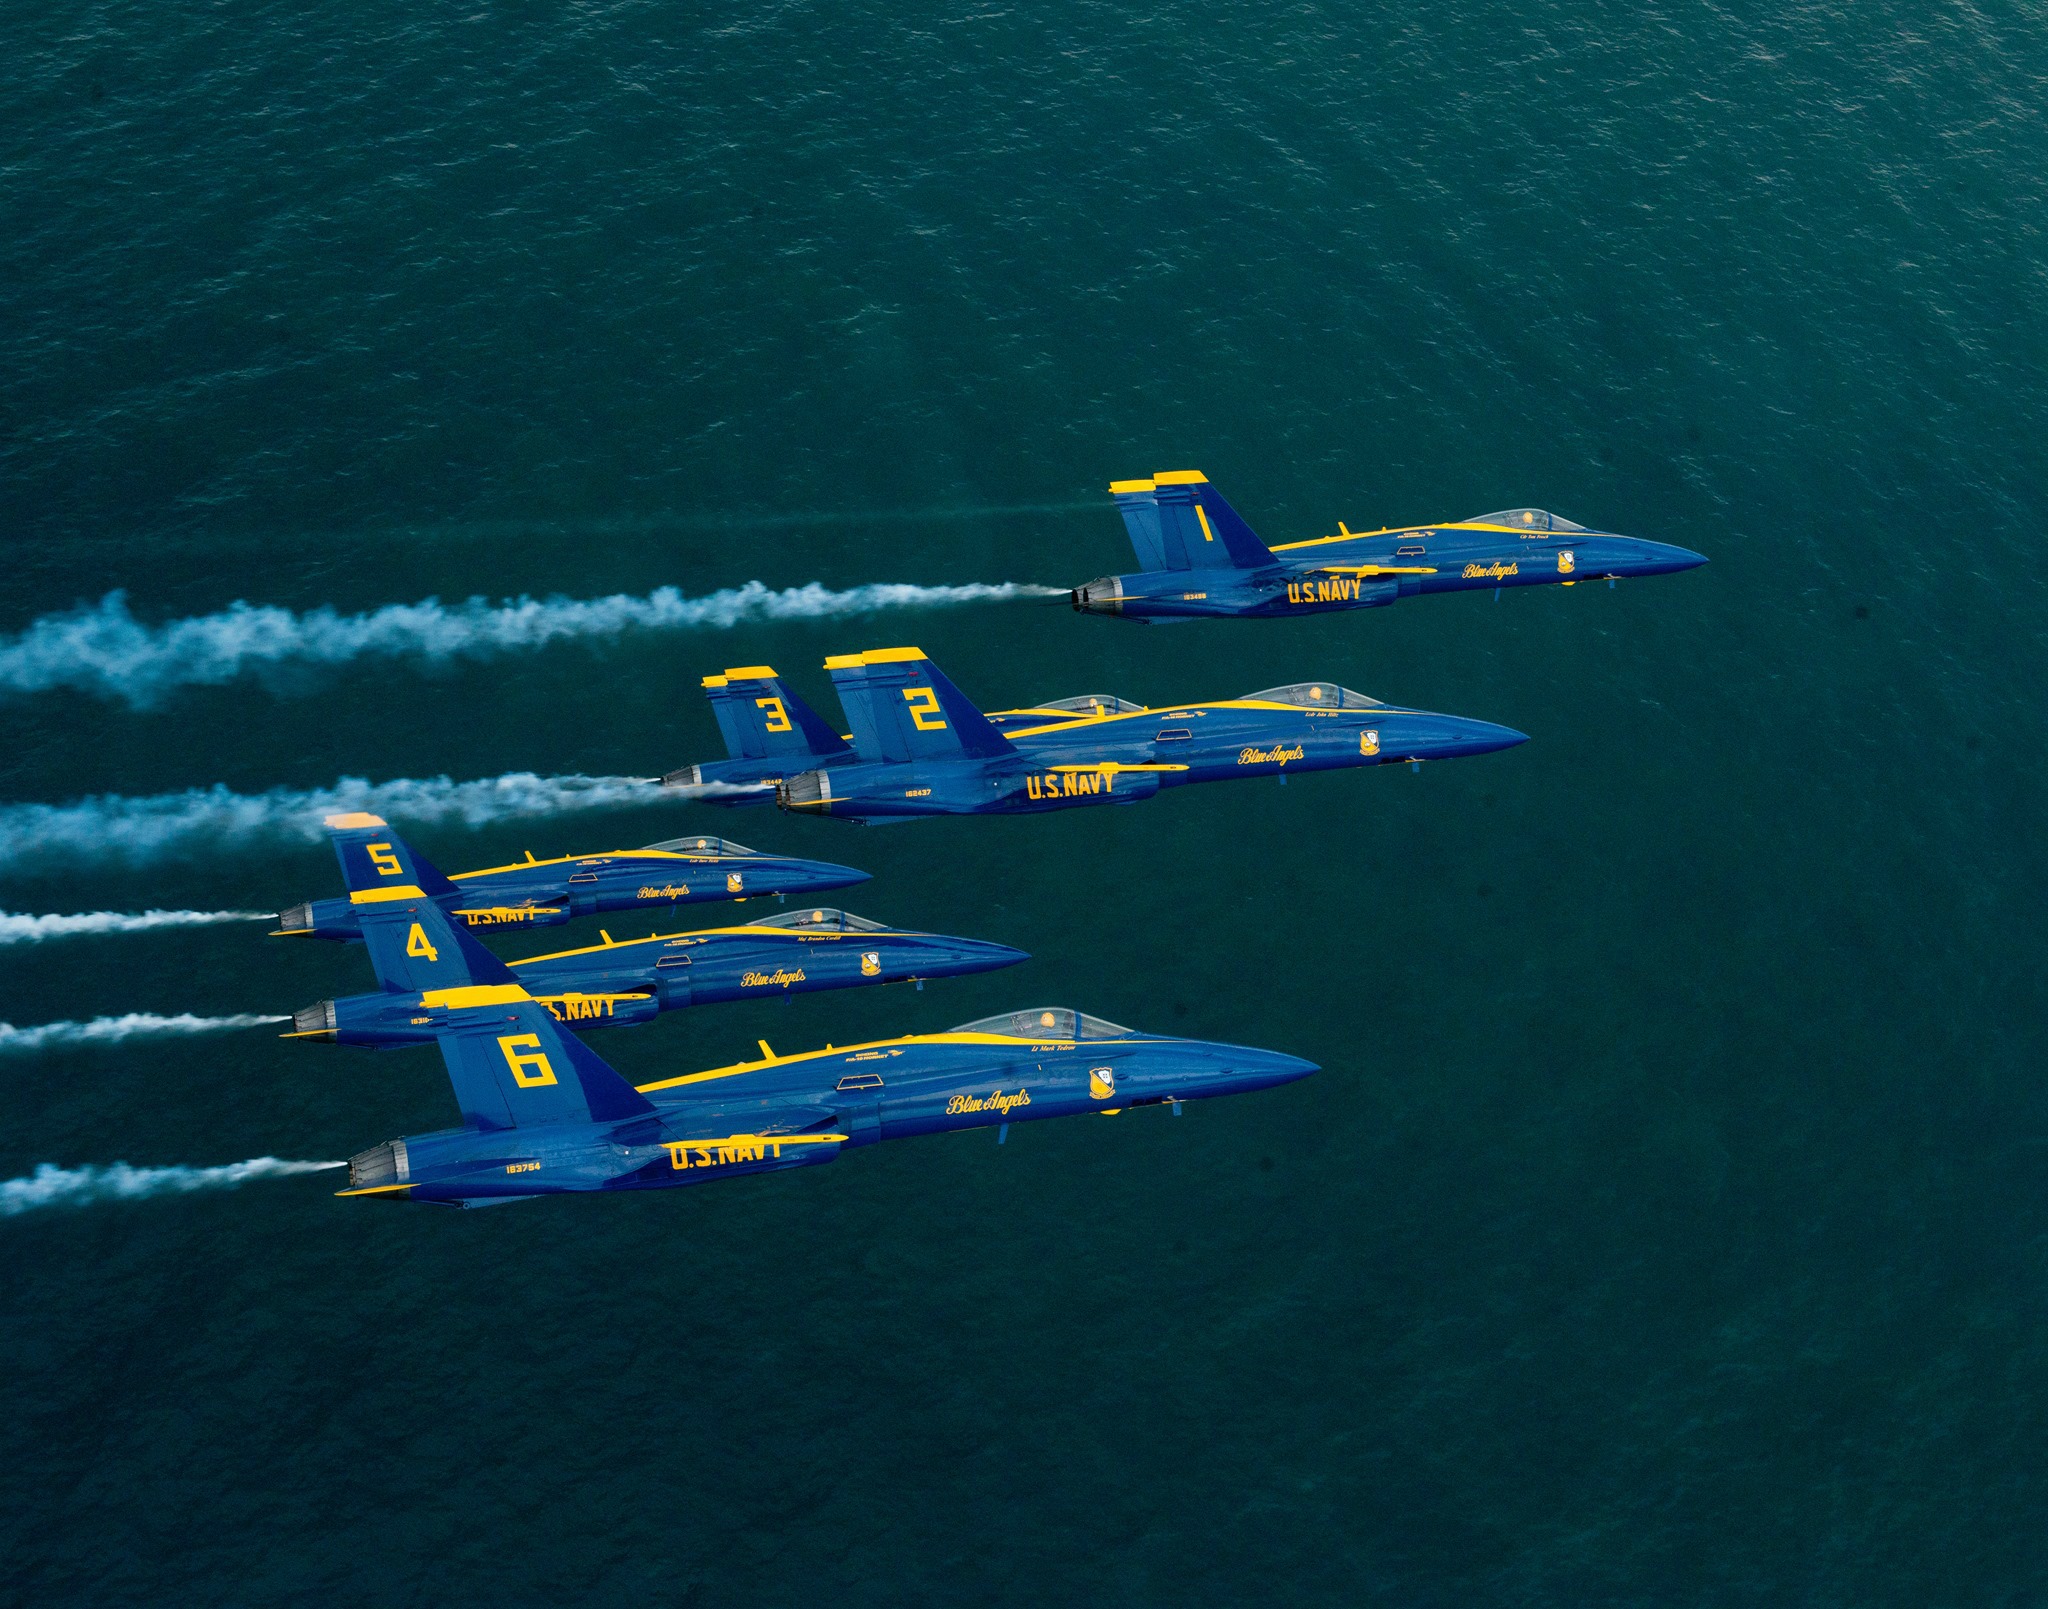 Six Blue Angels jets fly in formation over the Gulf of Mexico in Pensacola Beach FL.